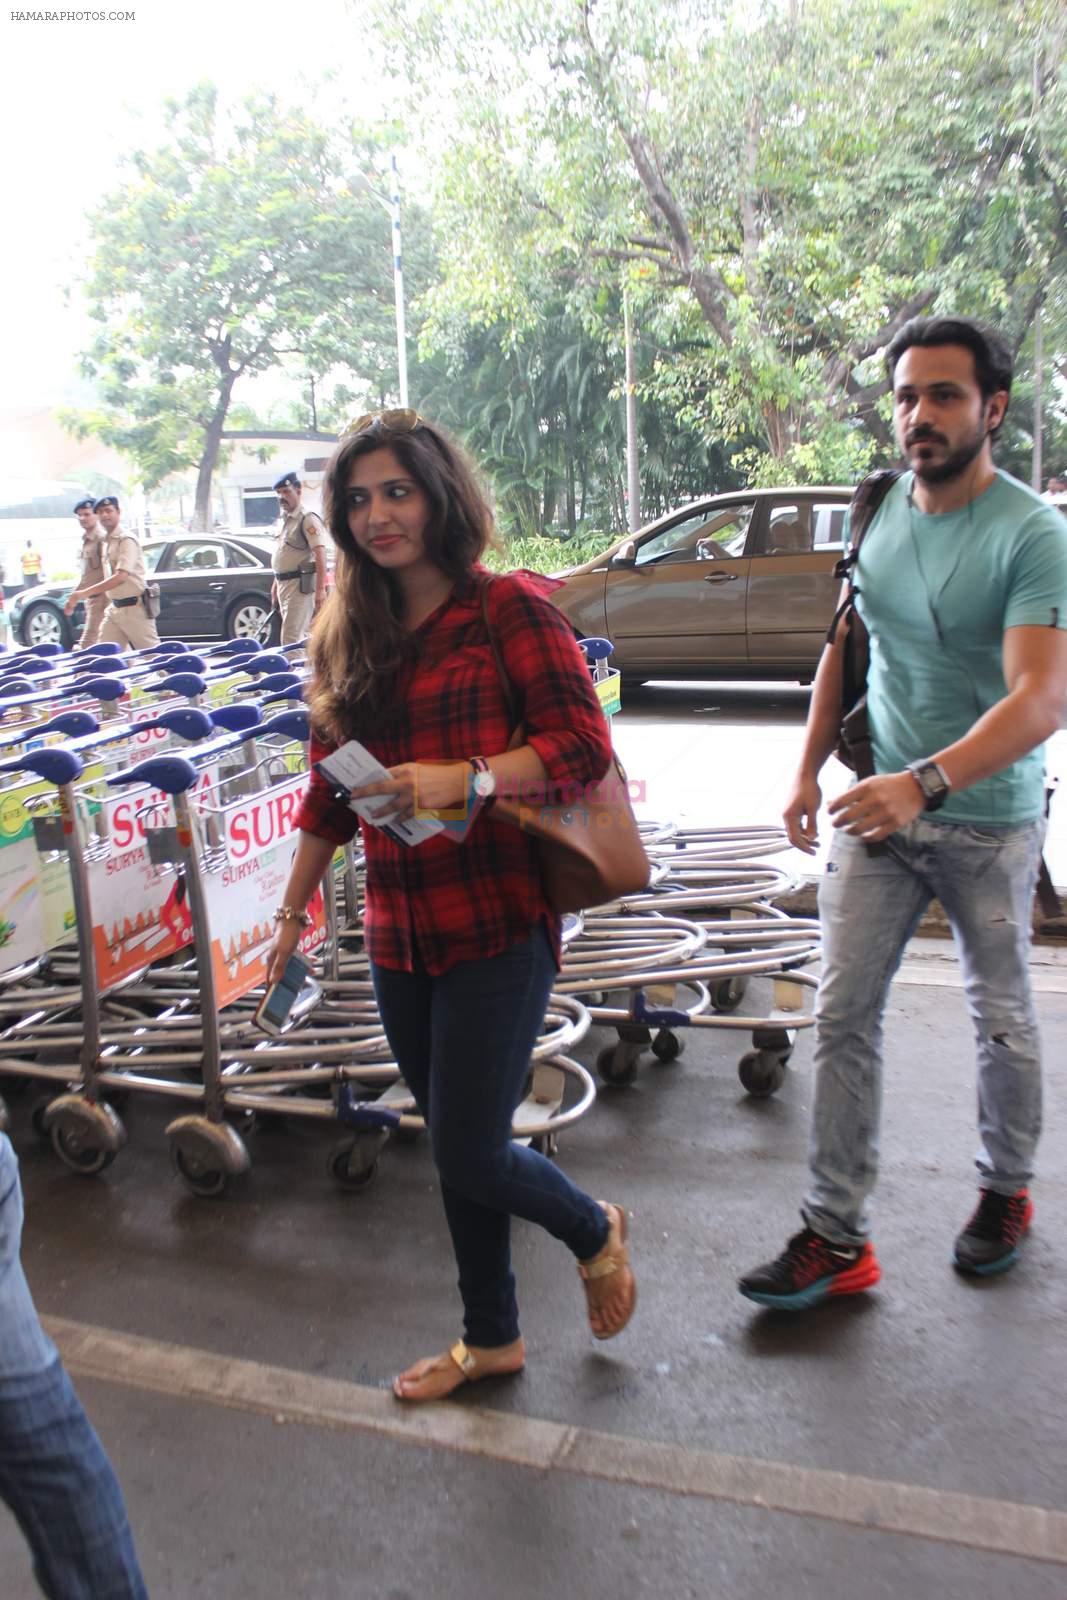 Emraan Hashmi snapped at airport on 25th Oct 2015